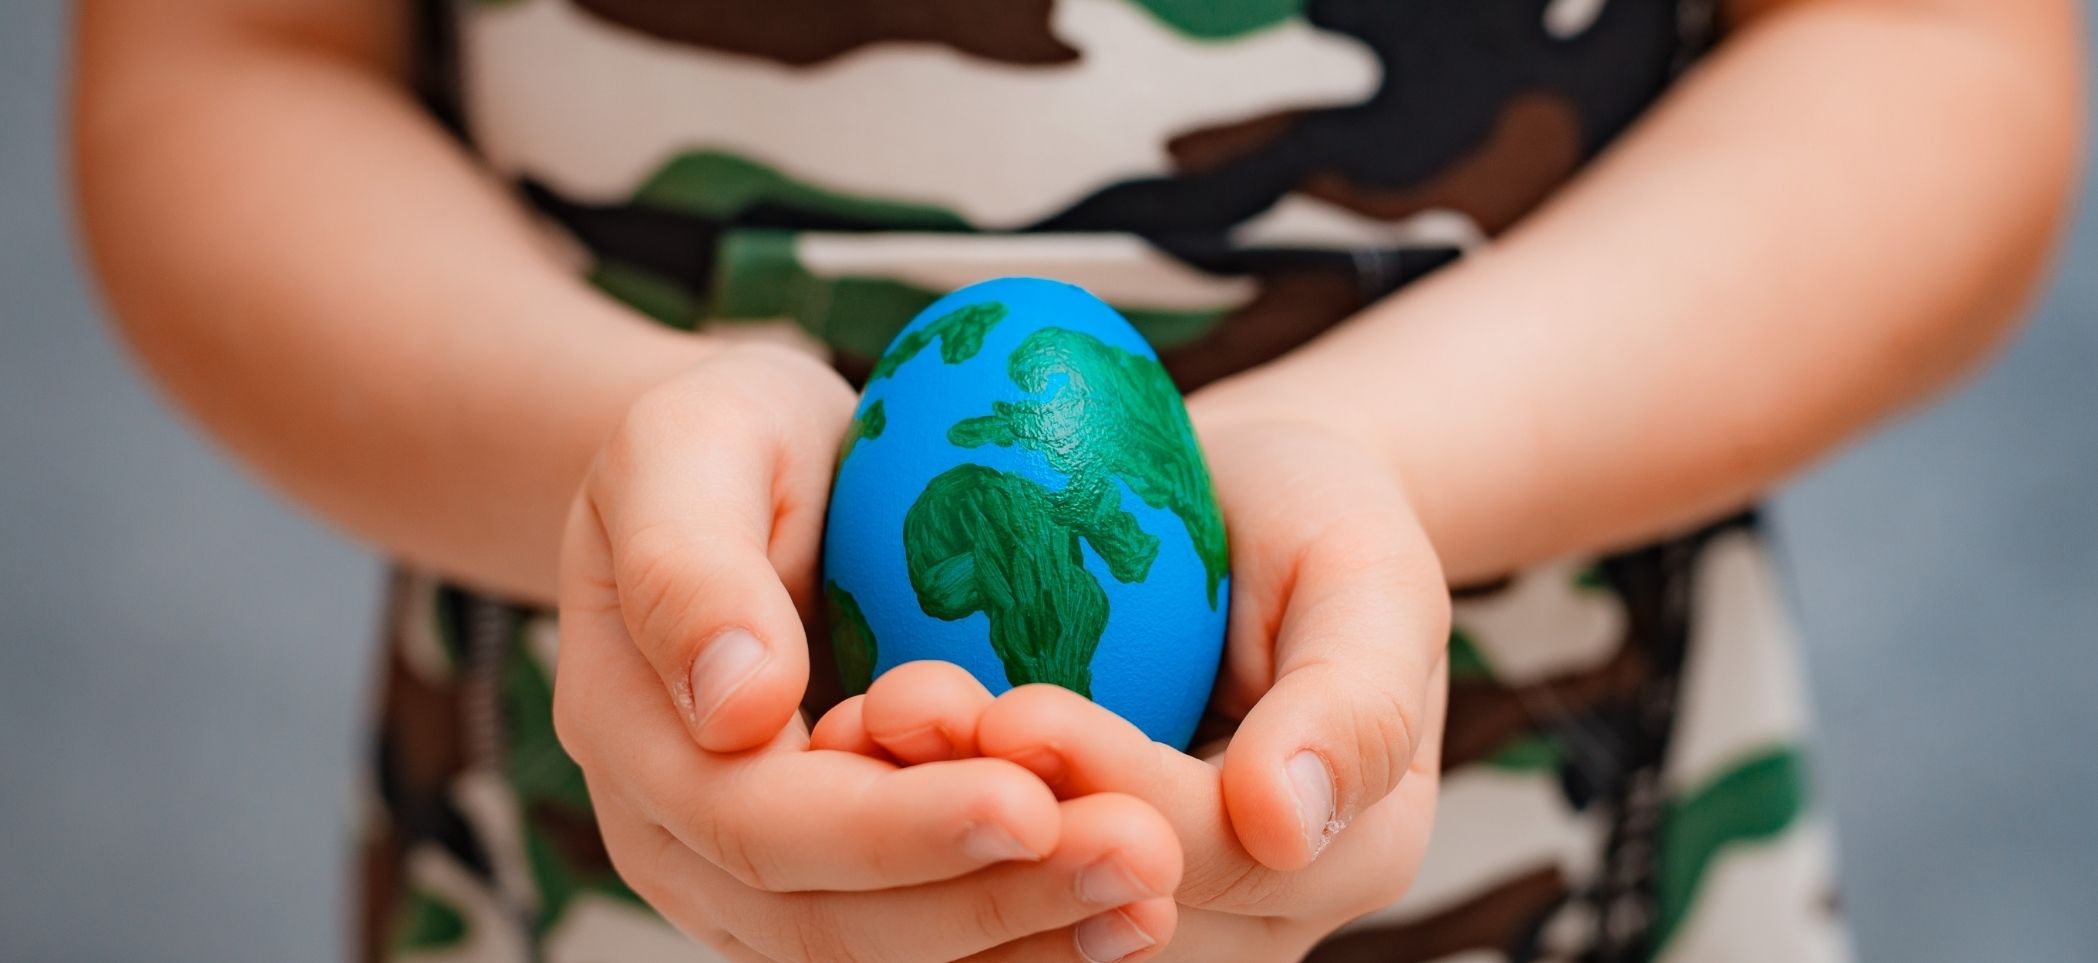 a child holds an egg that is painted like a globe